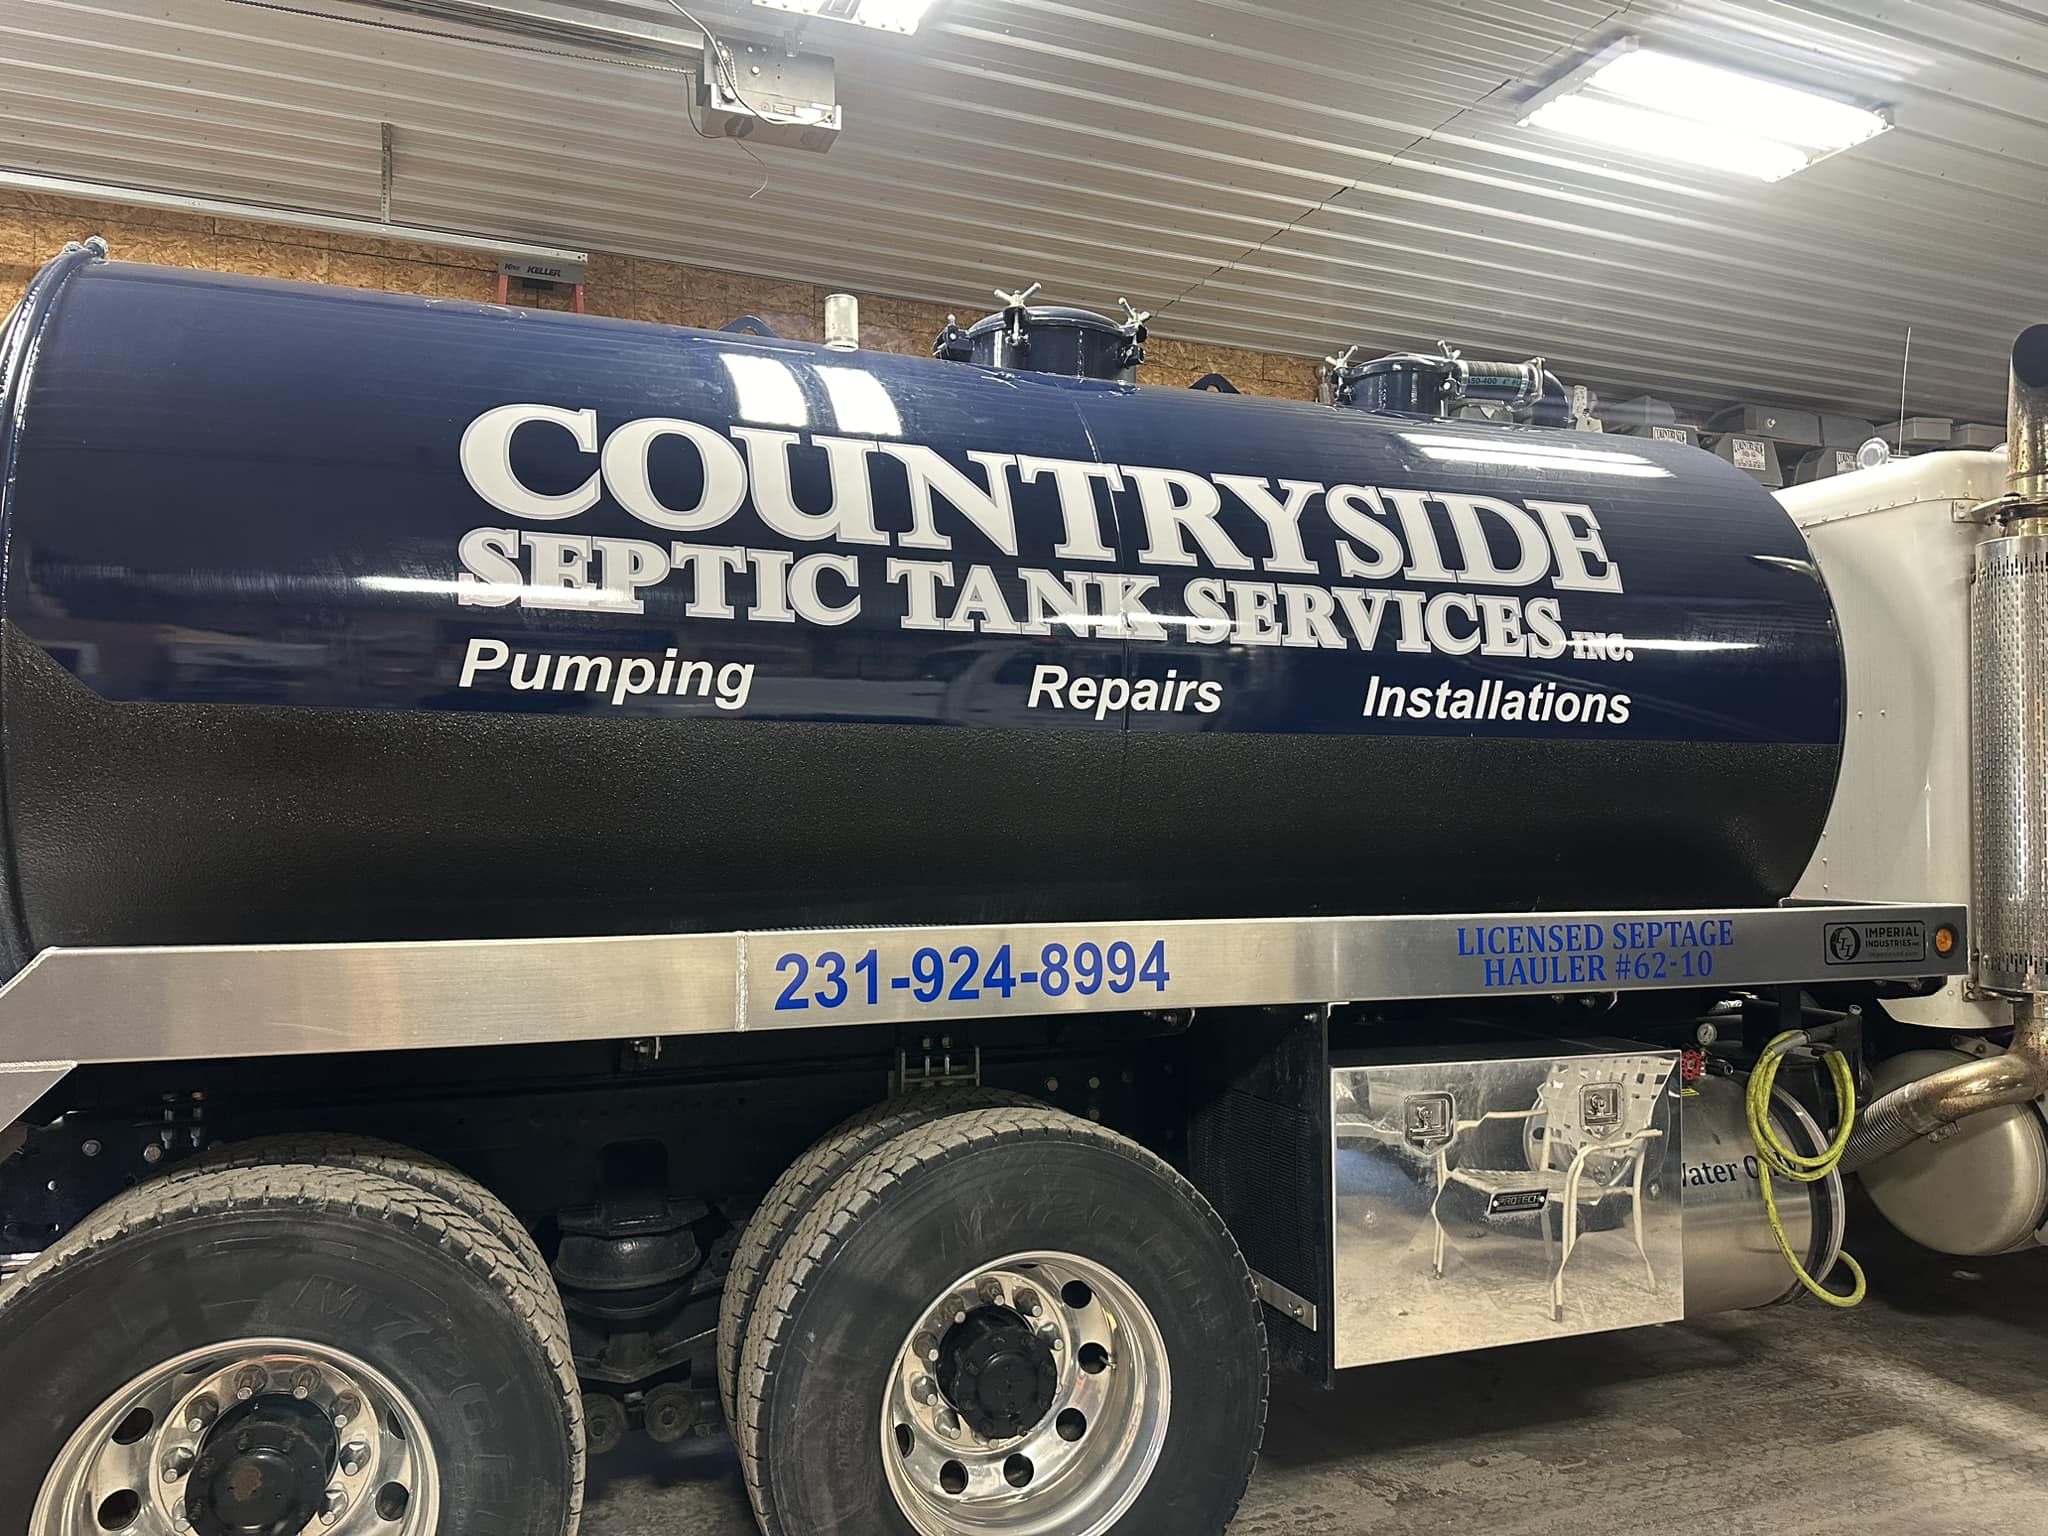 Countryside Septic Tank Services 6617 W 64th St, Fremont Michigan 49412